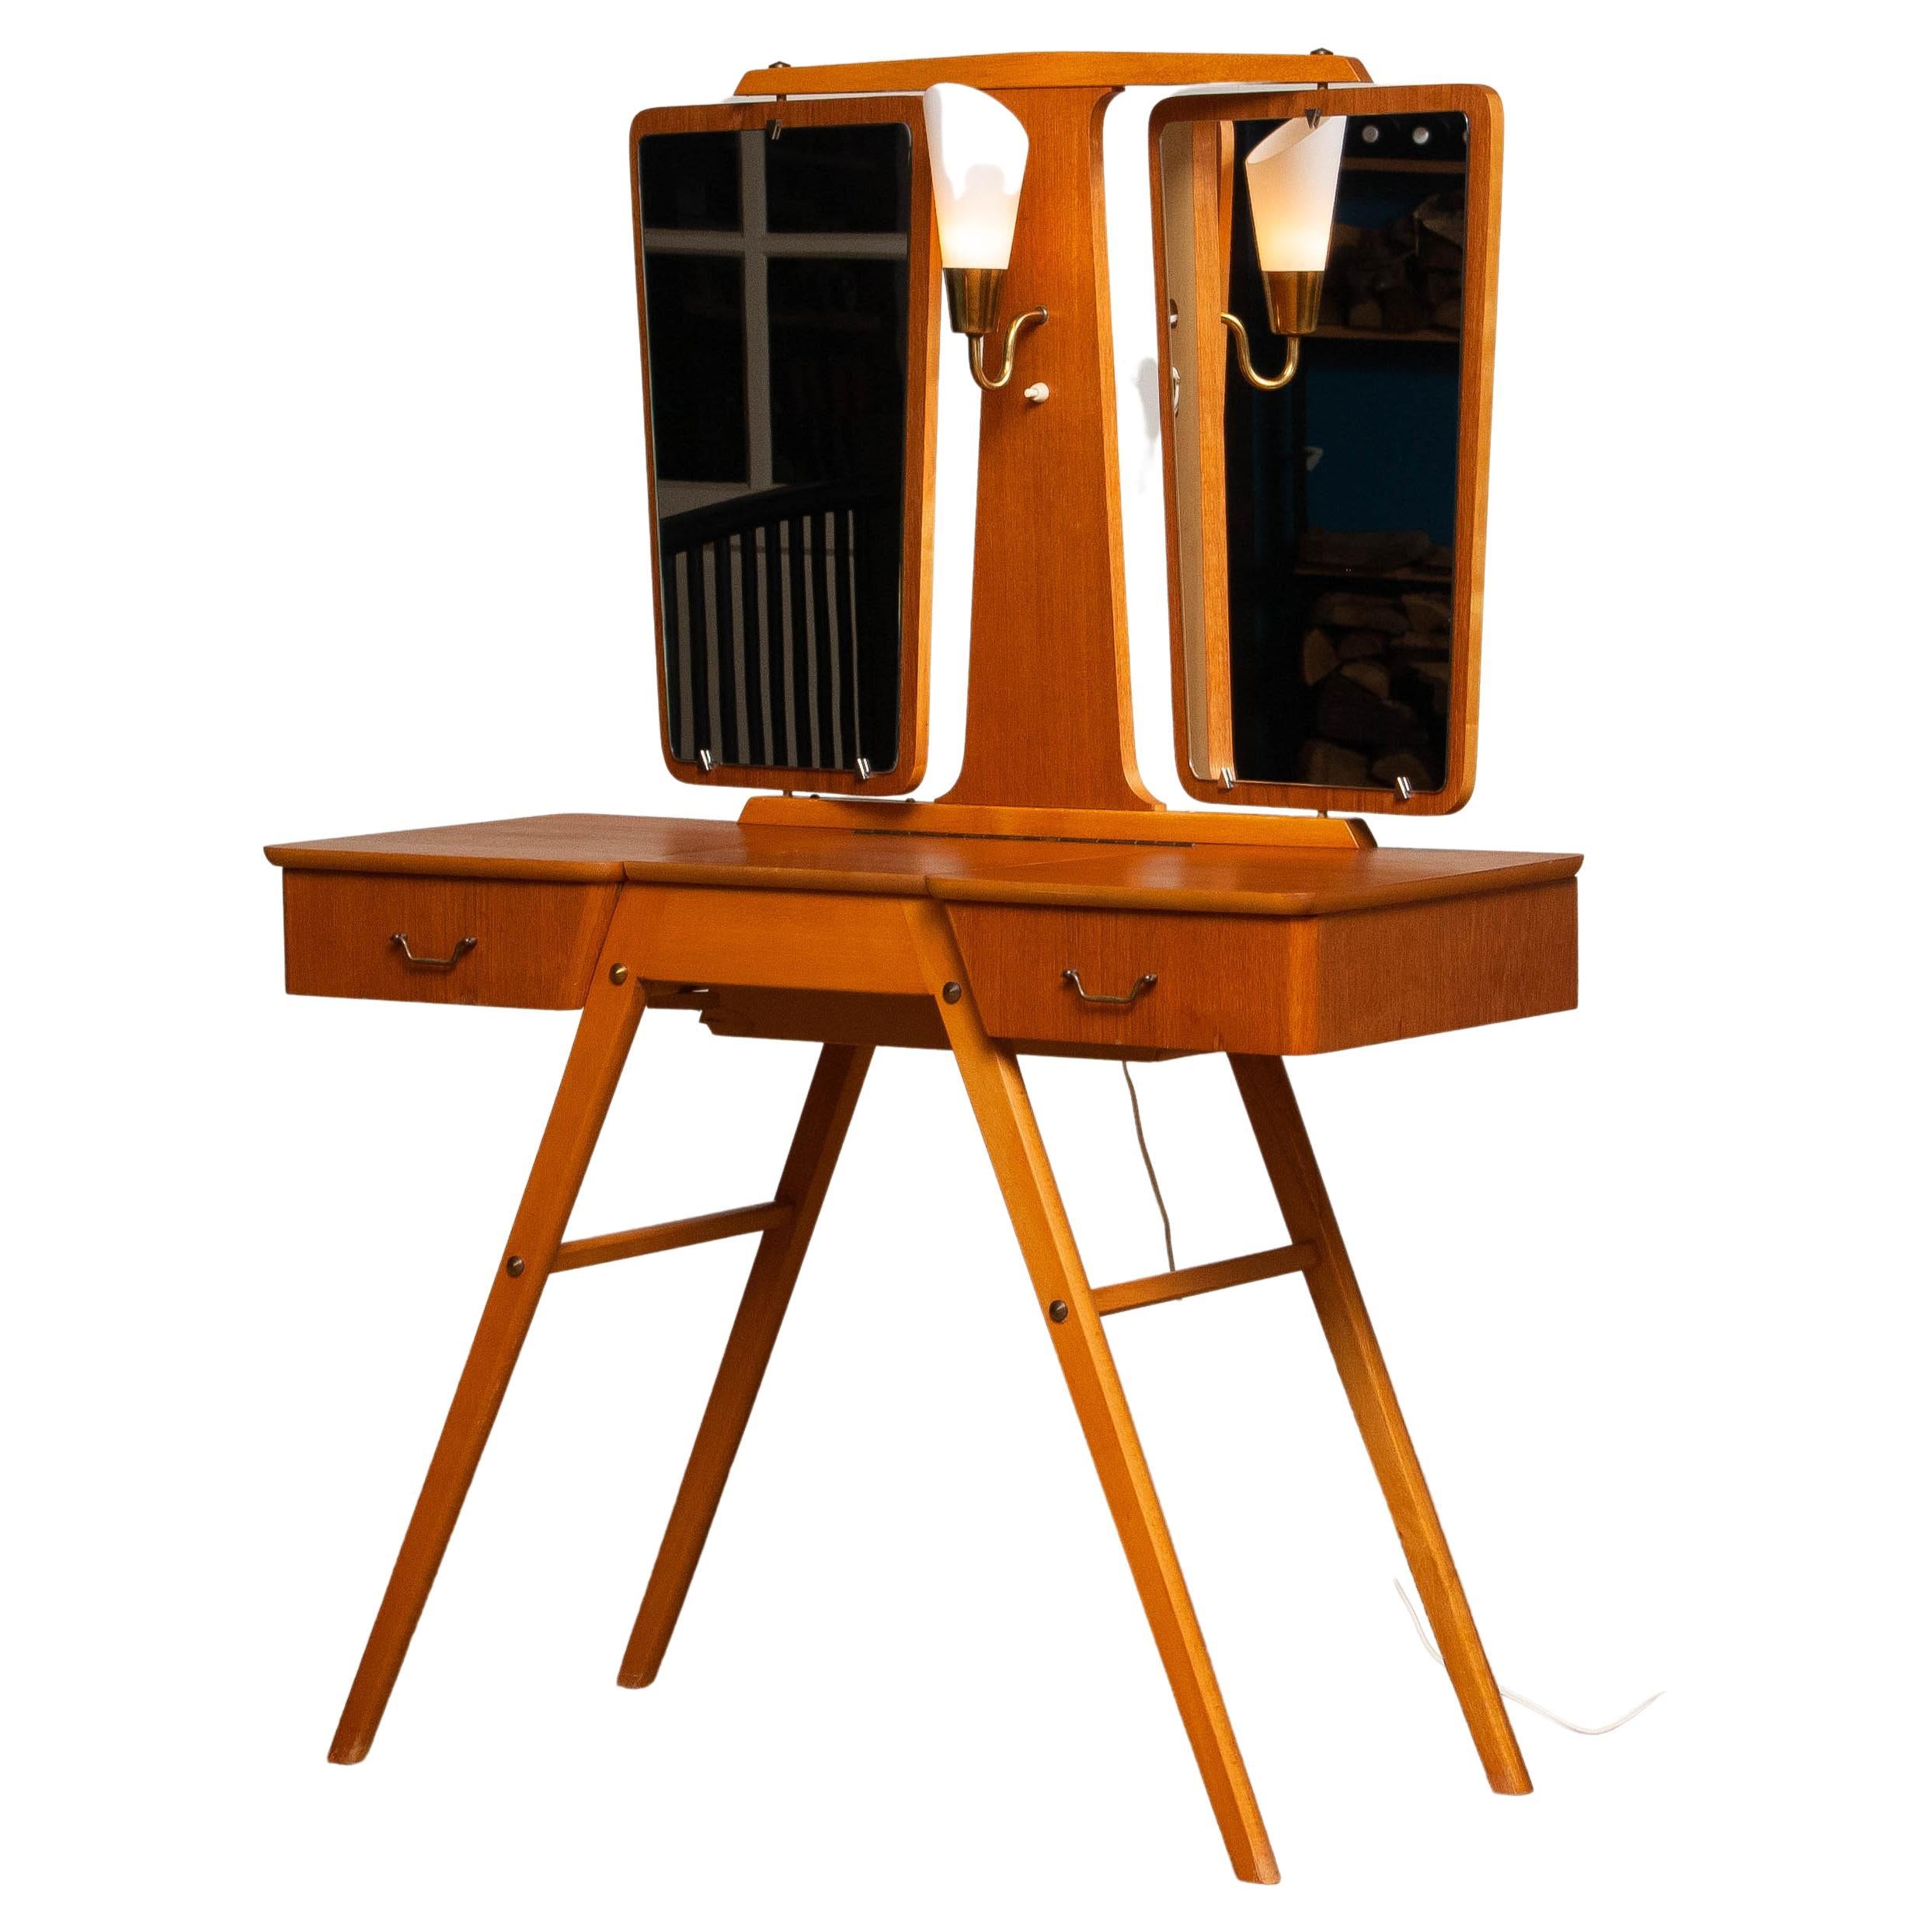 1950's Teak Slim Scandinavian Vanity with Two Mirrors and Light by G & T Sweden